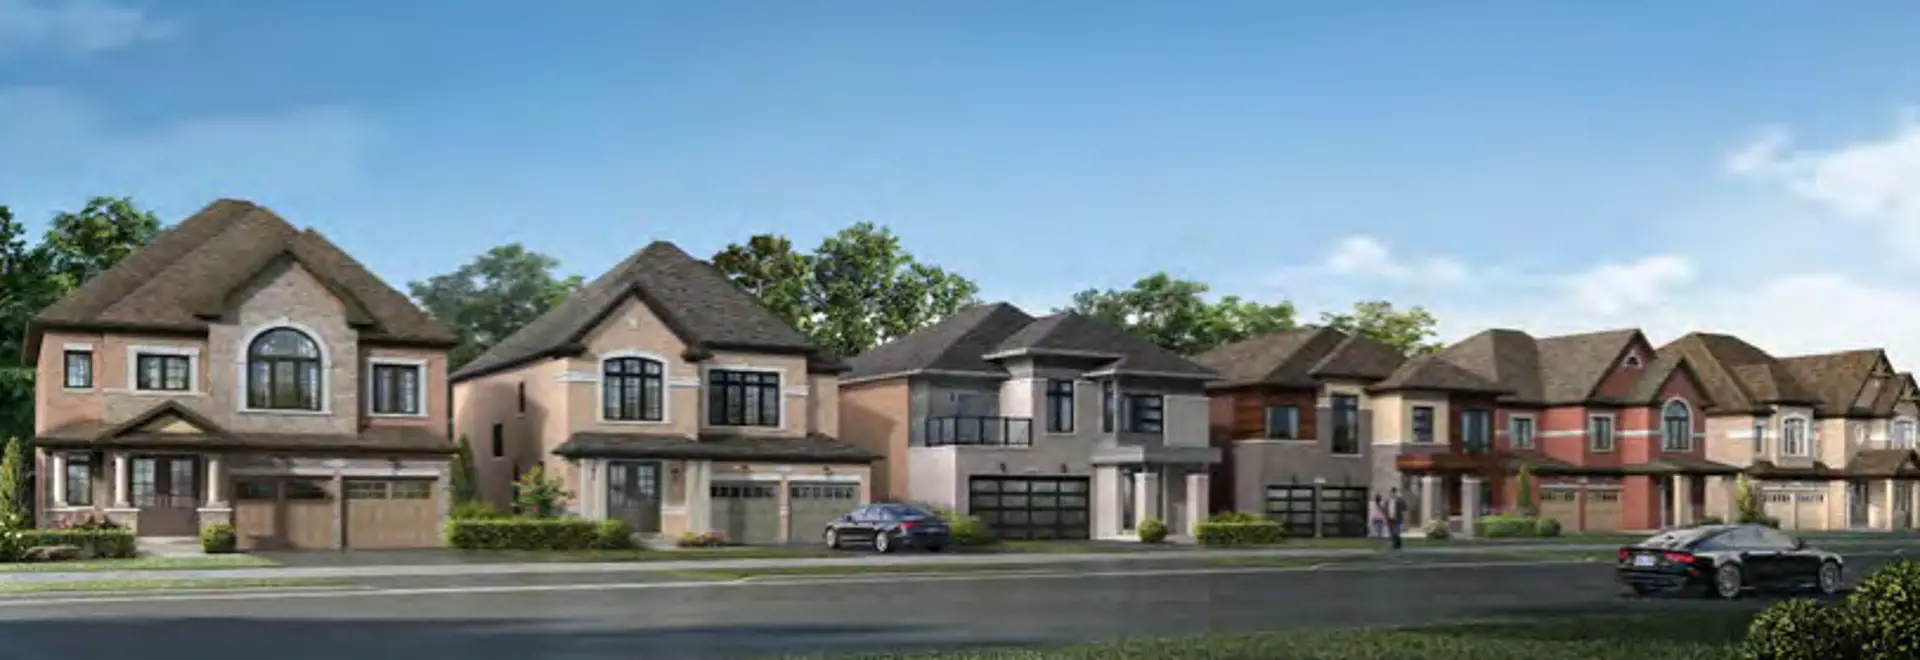 The Bright Side at Mayfield Village located at Bramalea Road & Duxbury Road,  Brampton,   ON image